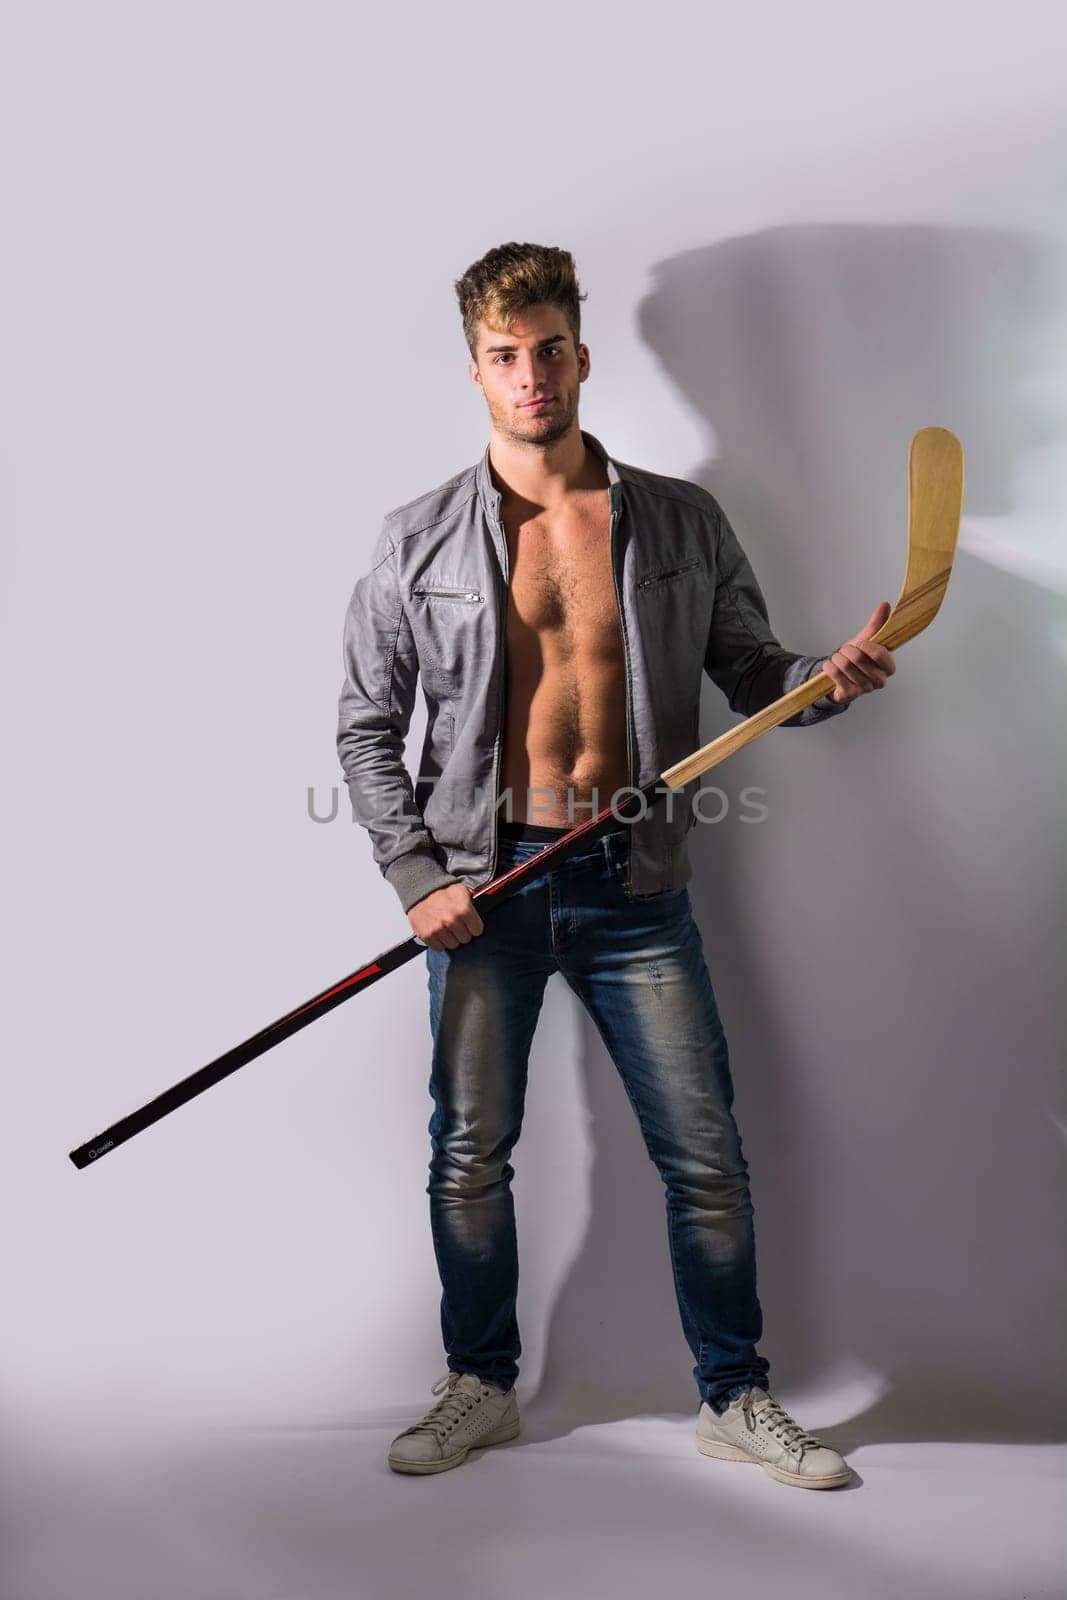 Photo of a shirtless man with a hockey stick and puck by artofphoto